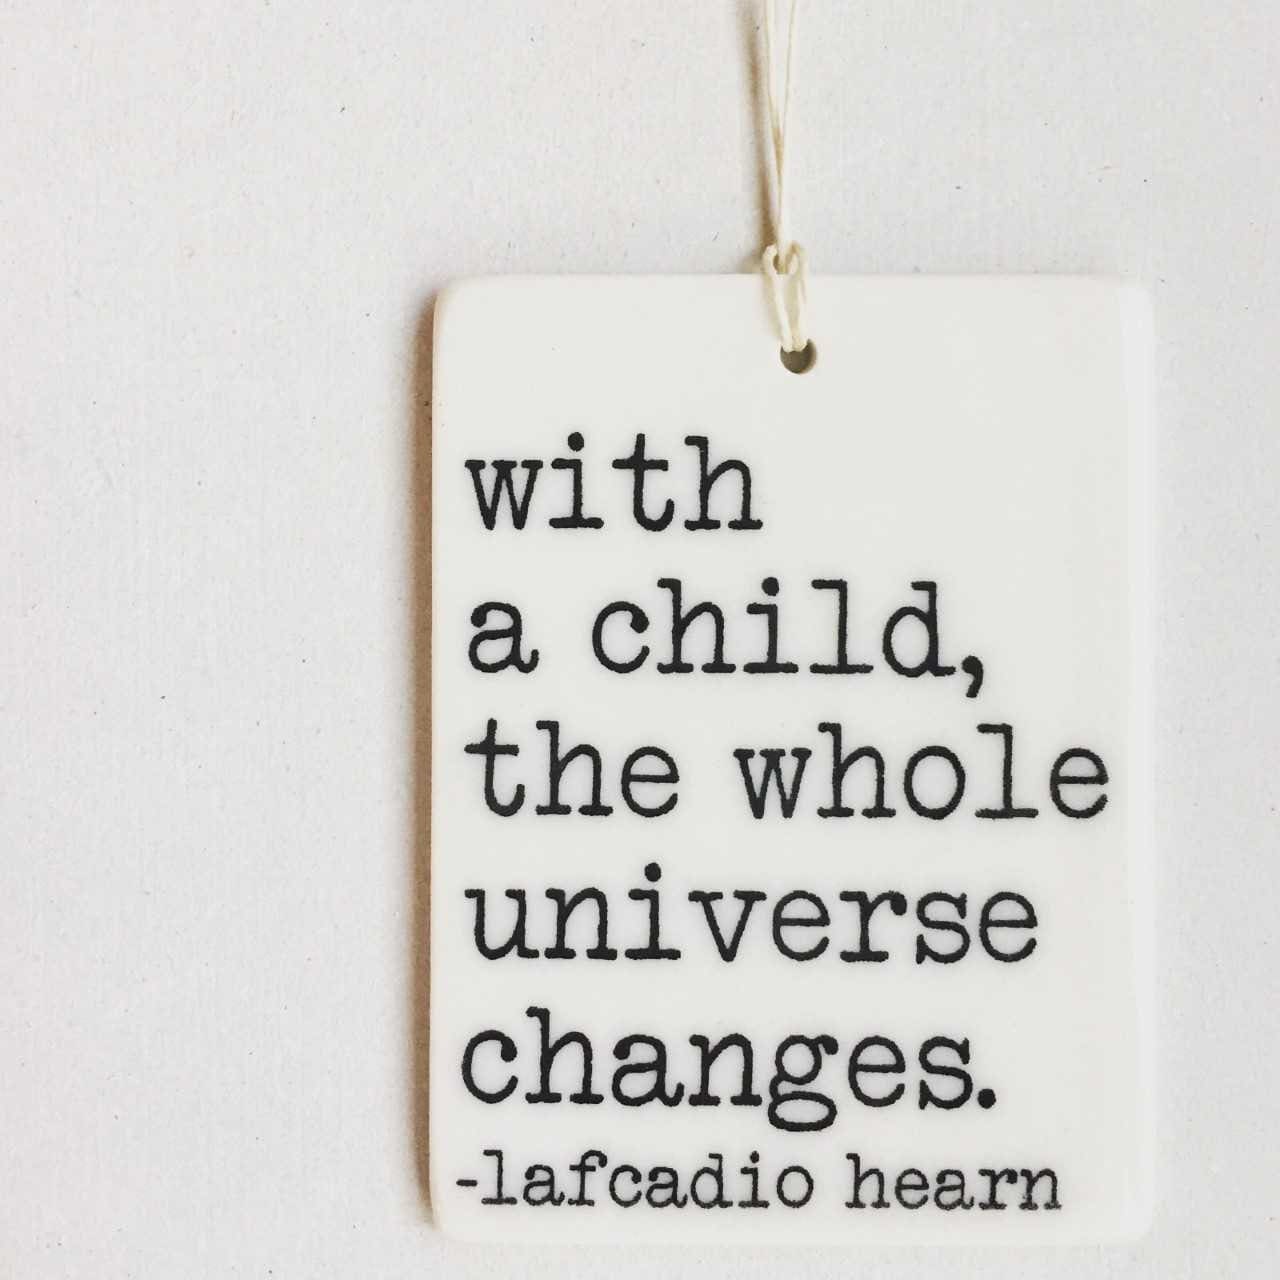 lafcadio hearn quote | ceramic wall tag | ceramic wall art | nursery decor | new parent gift | shower gift | midwife | doula